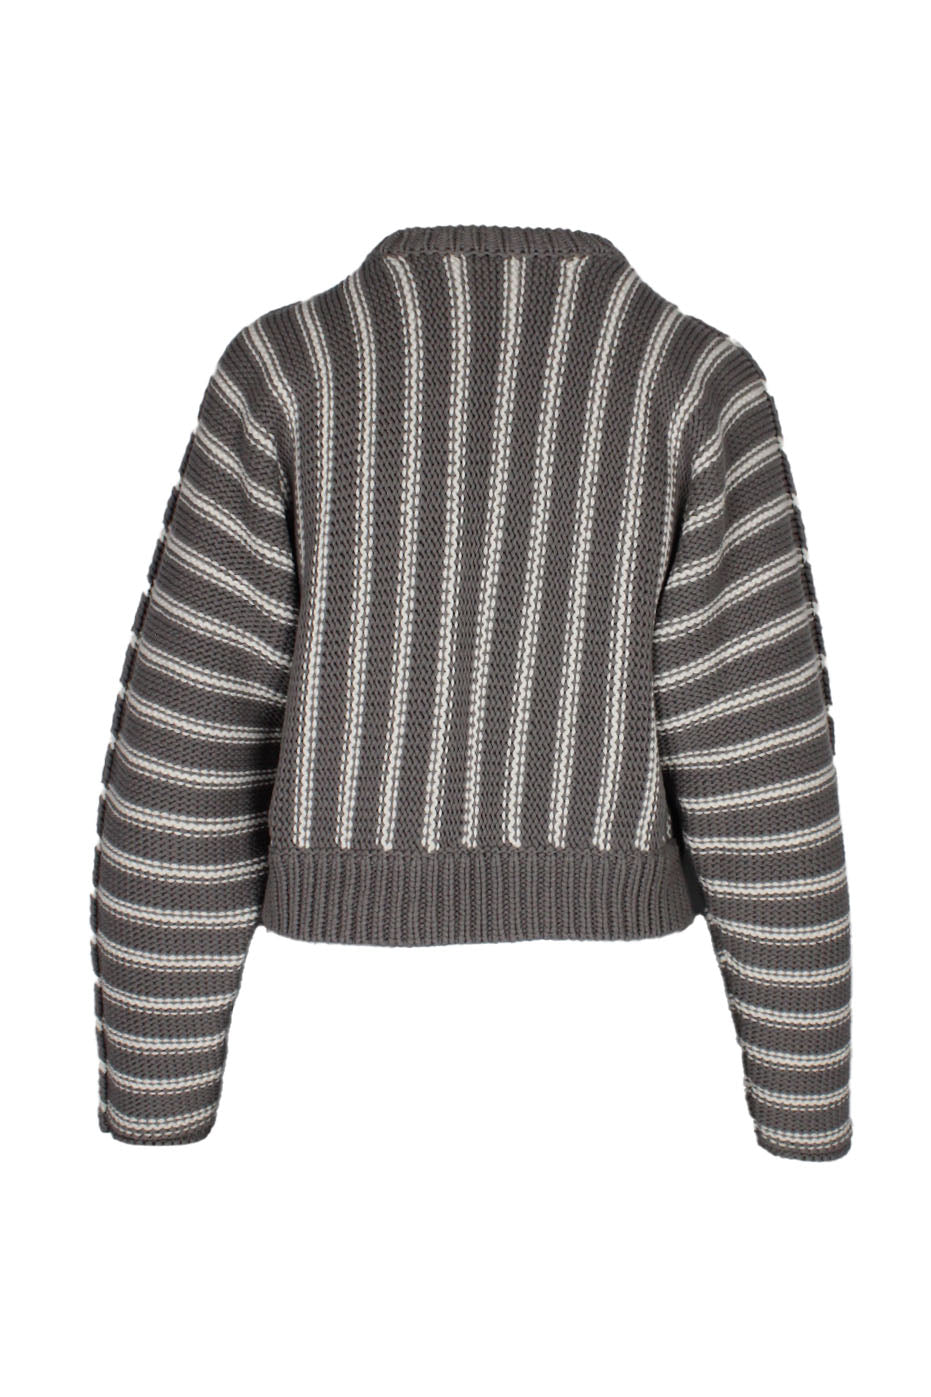 back of sweater with relaxed fit. 